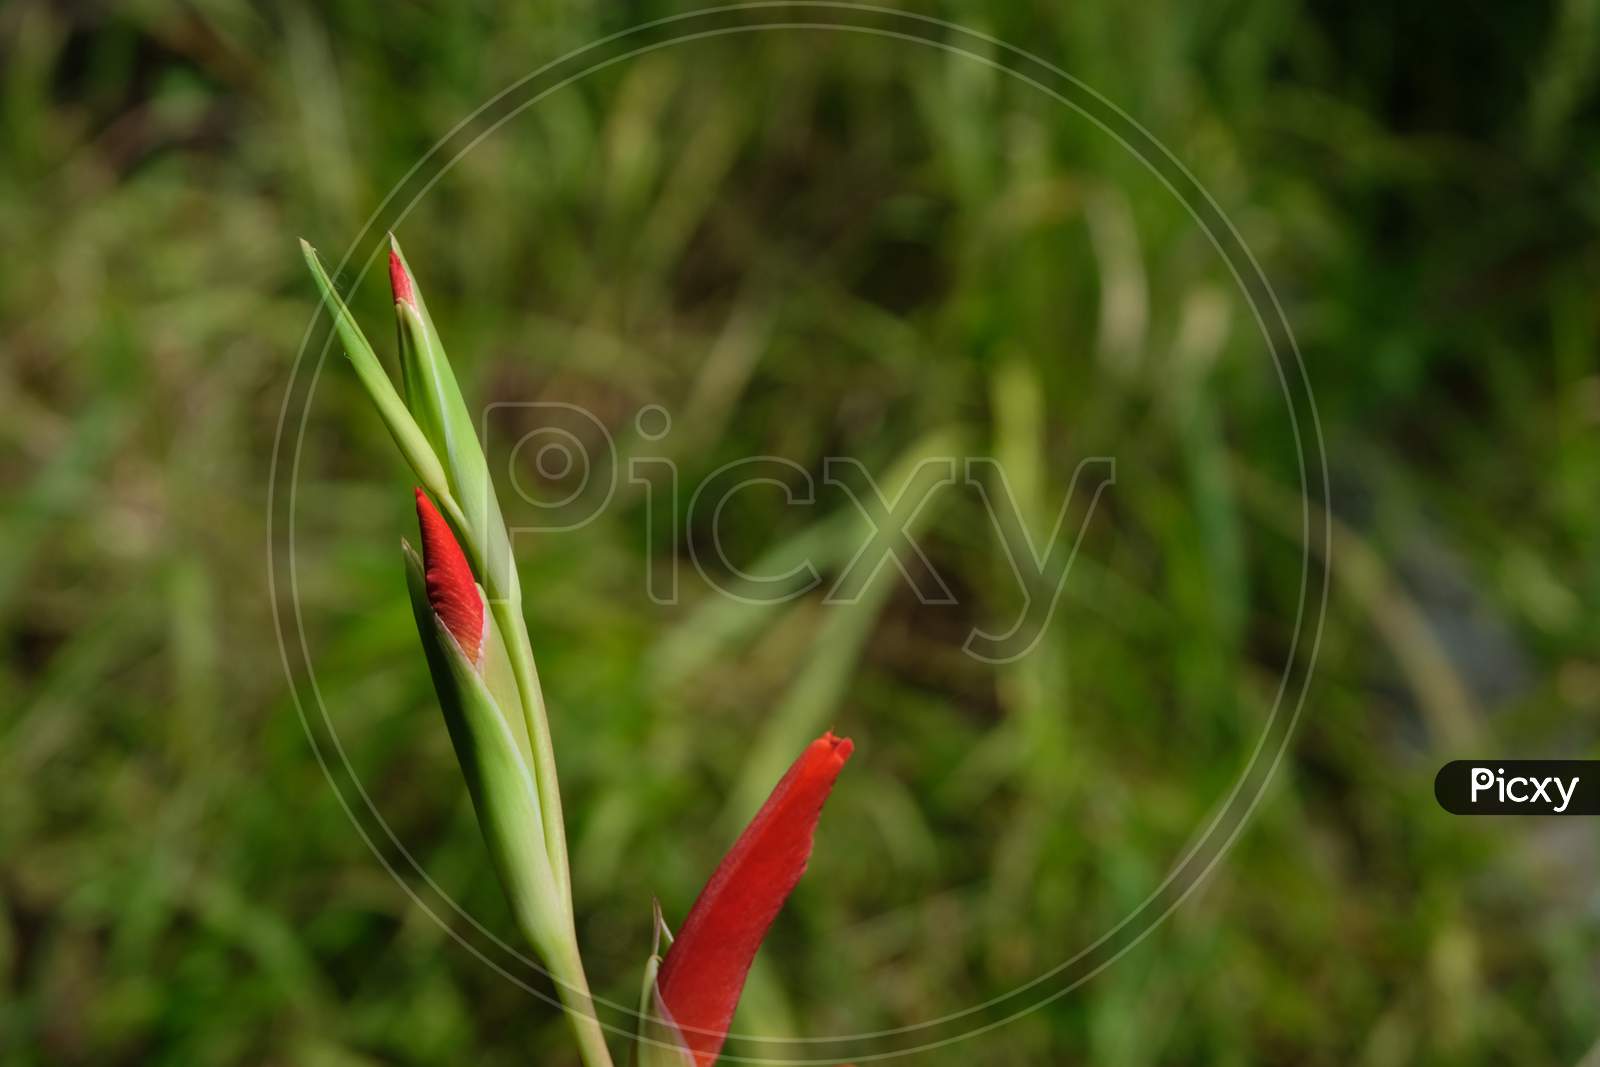 Red gladiolus flower buds ready to bloom